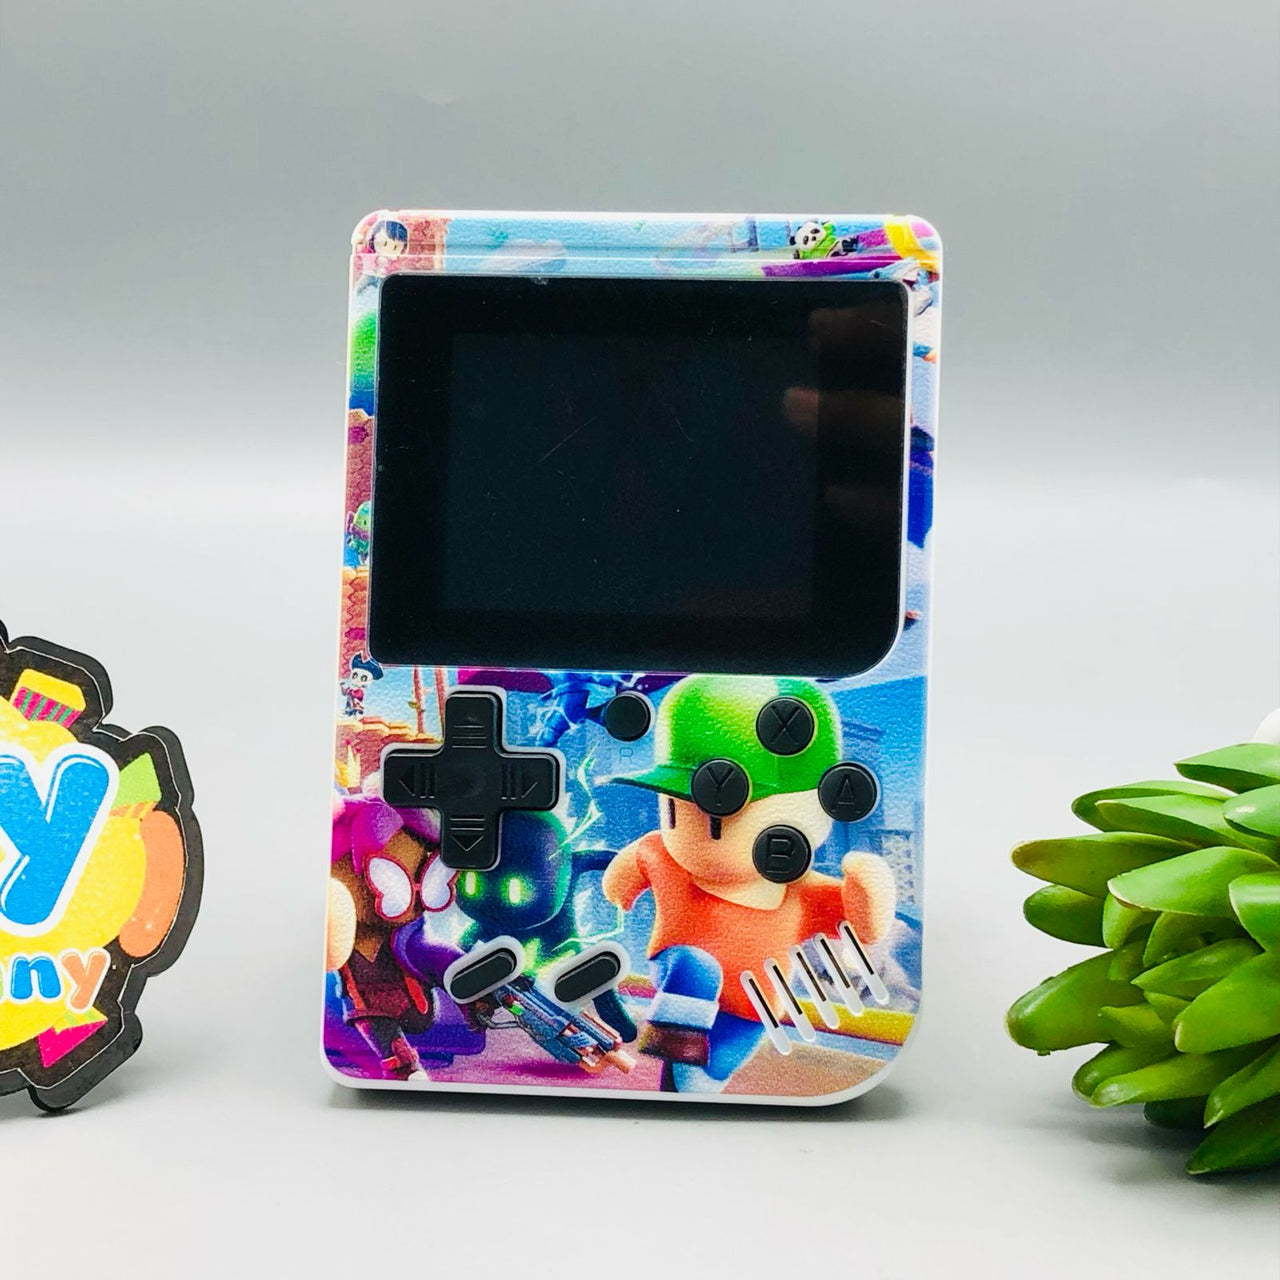 400in1 Portable Handheld Console Gaming